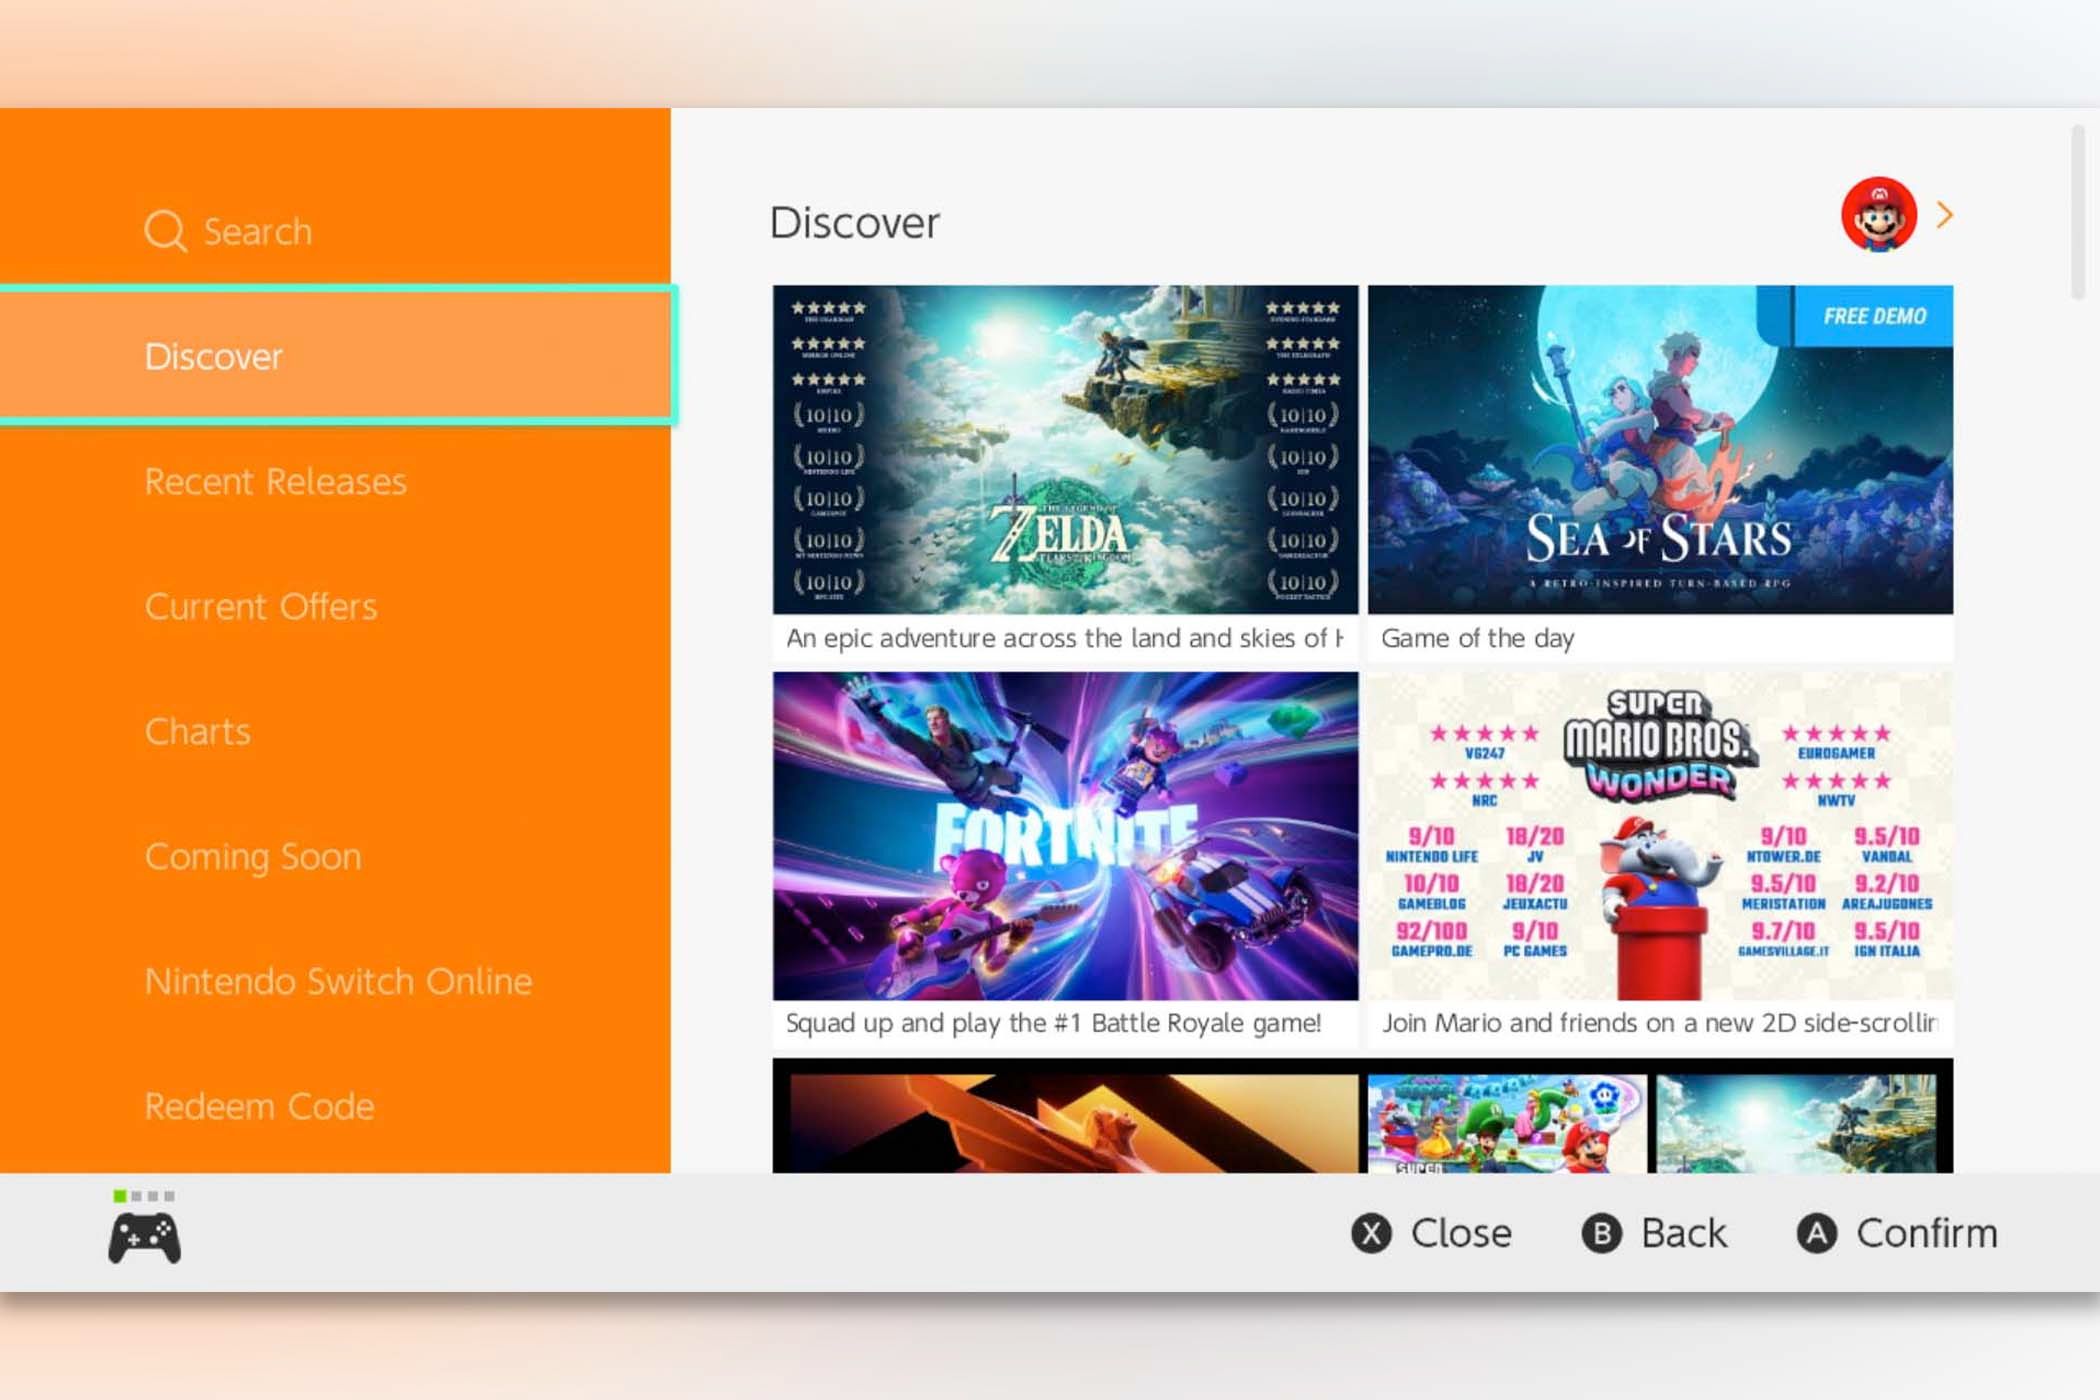 A screenshot of the Discover page on the Nintendo Switch eShop.